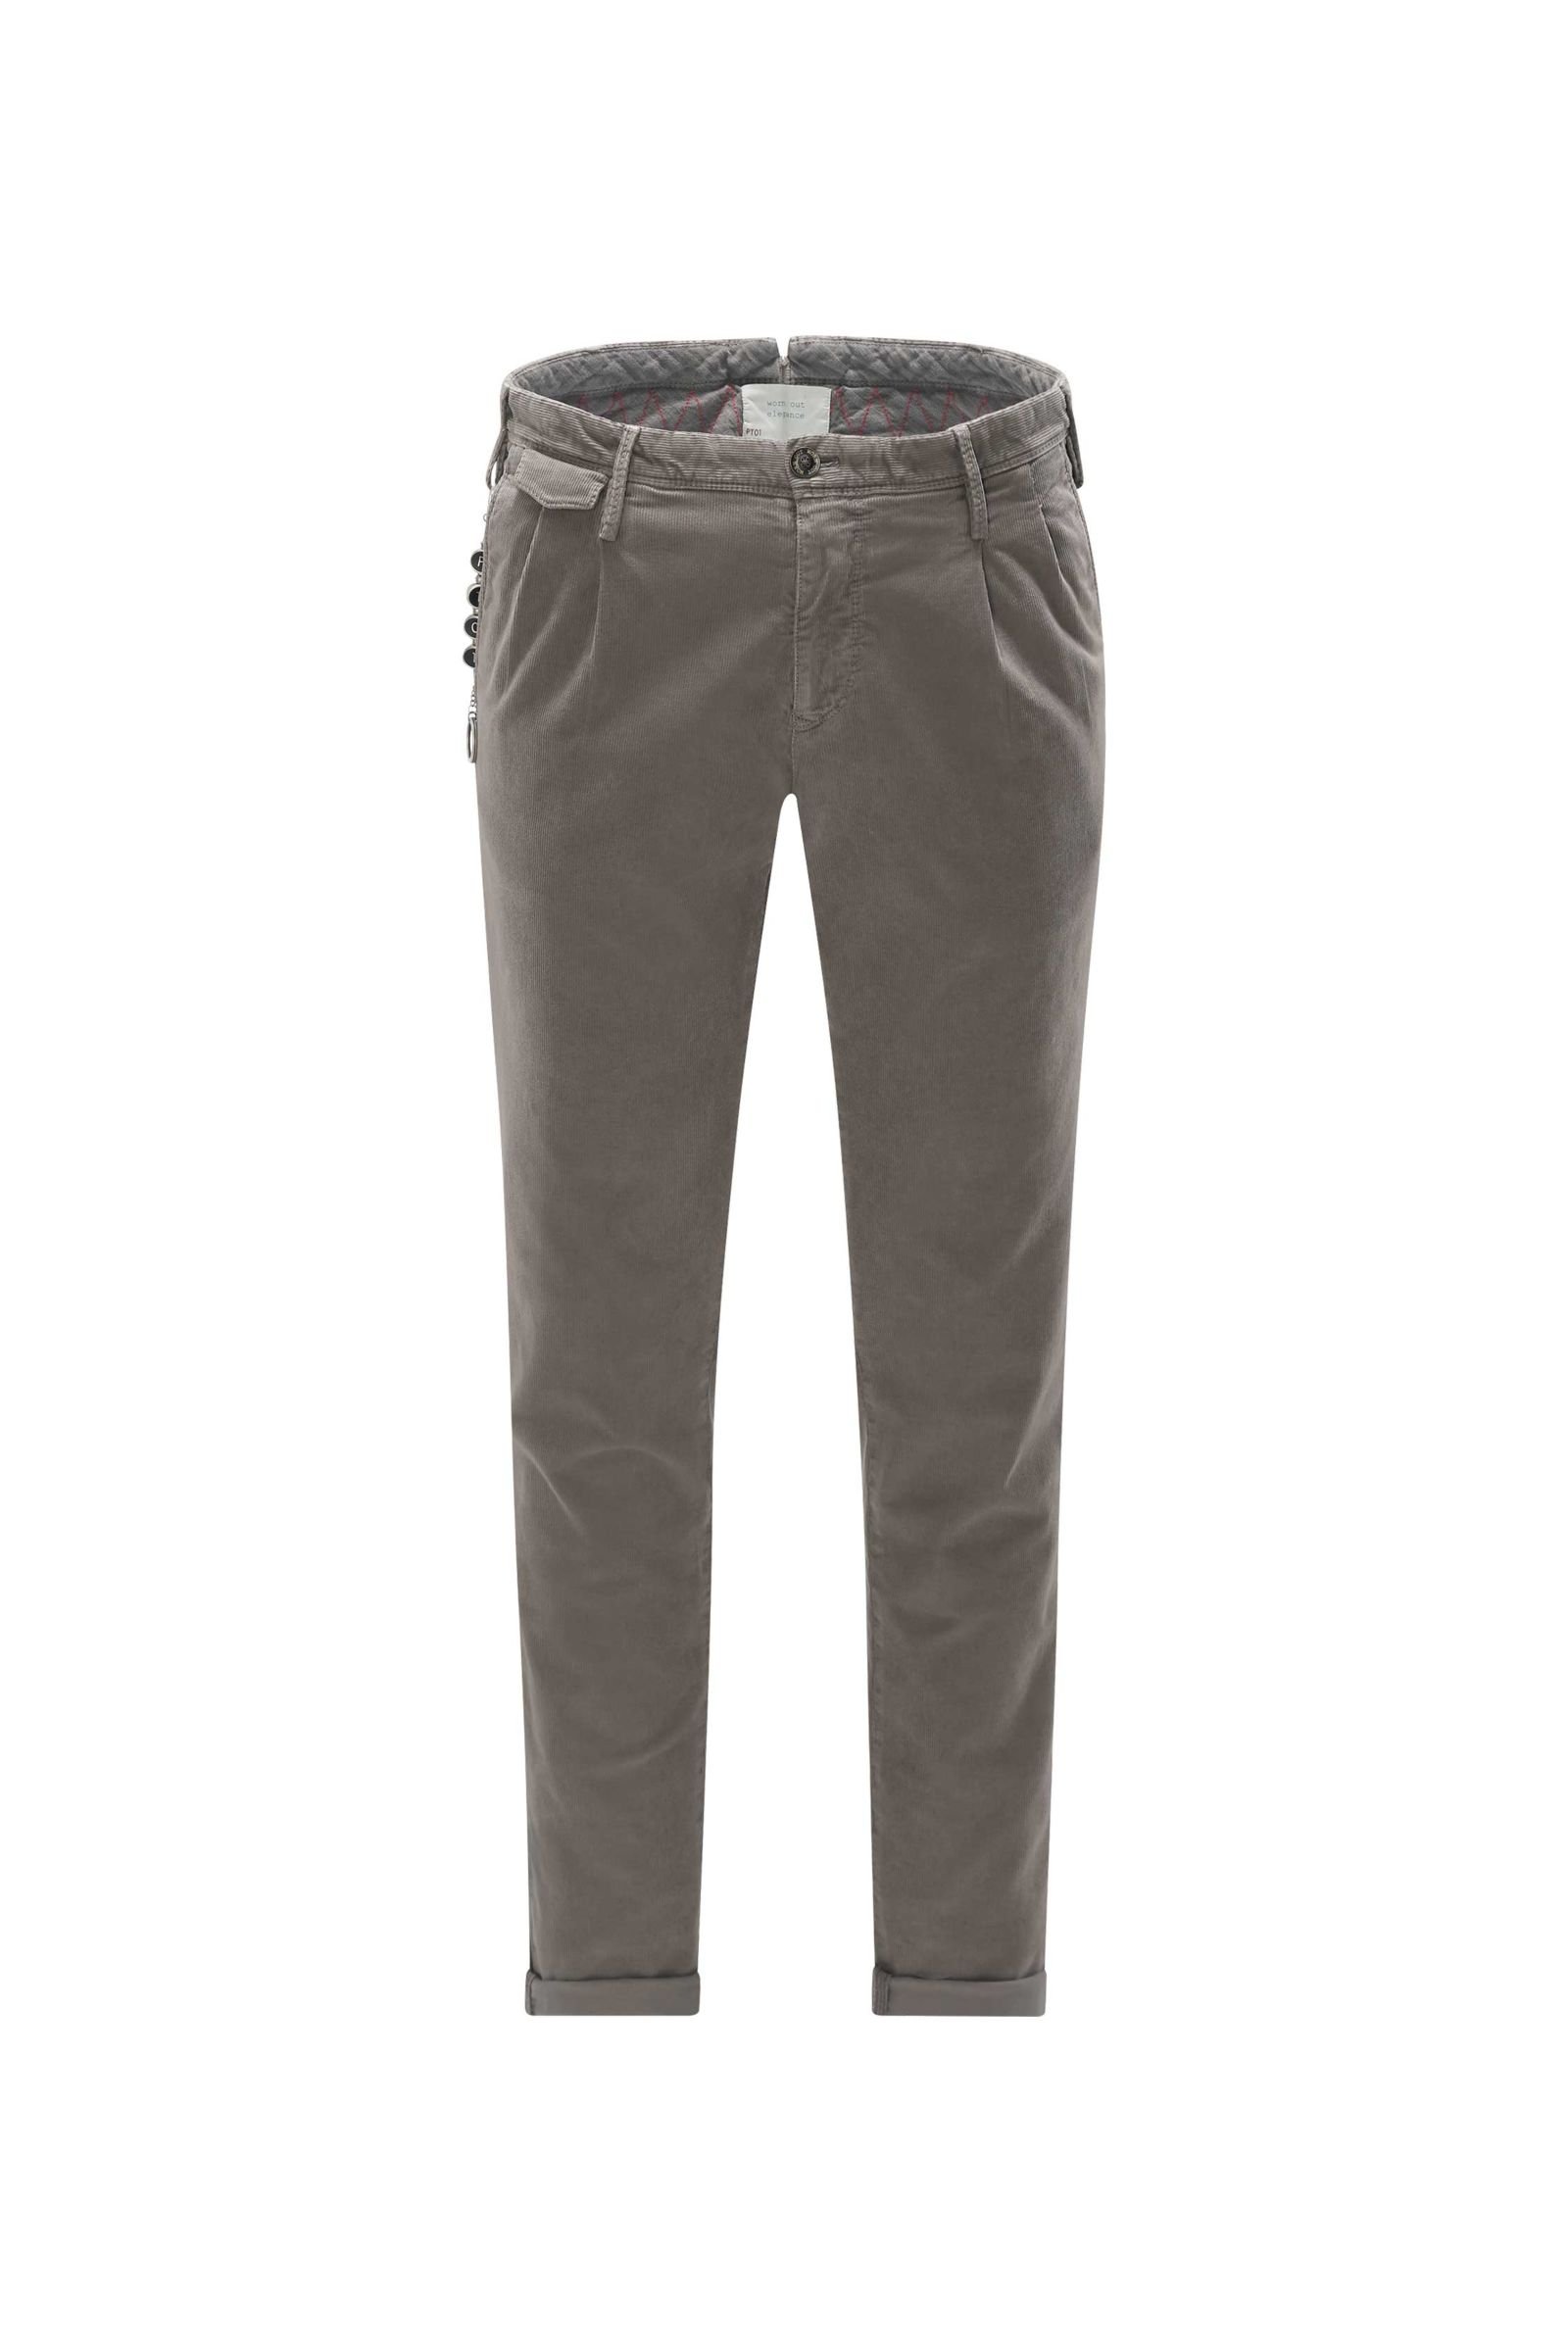 Corduroy trousers 'Arial Worn out Elegance' grey-brown